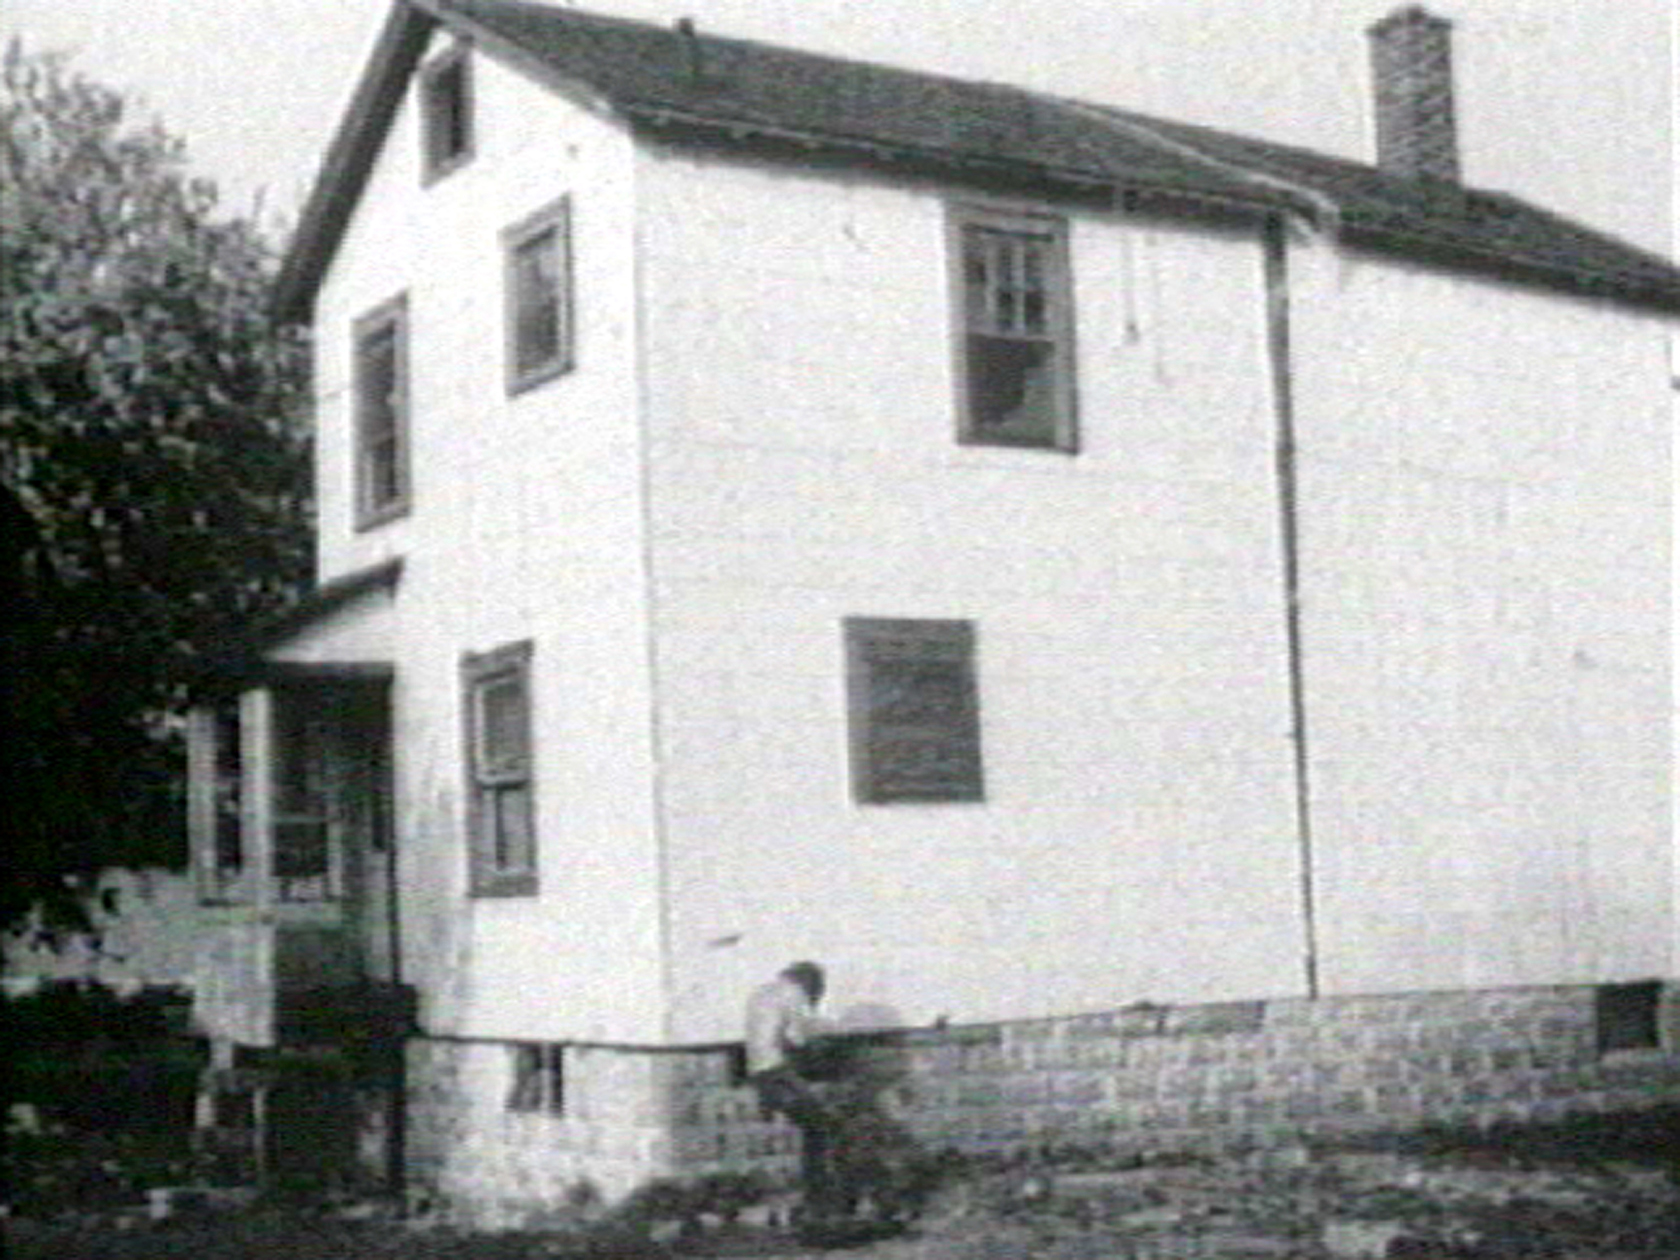 A black and white image of a two-story white house with a man standing near its foundation line